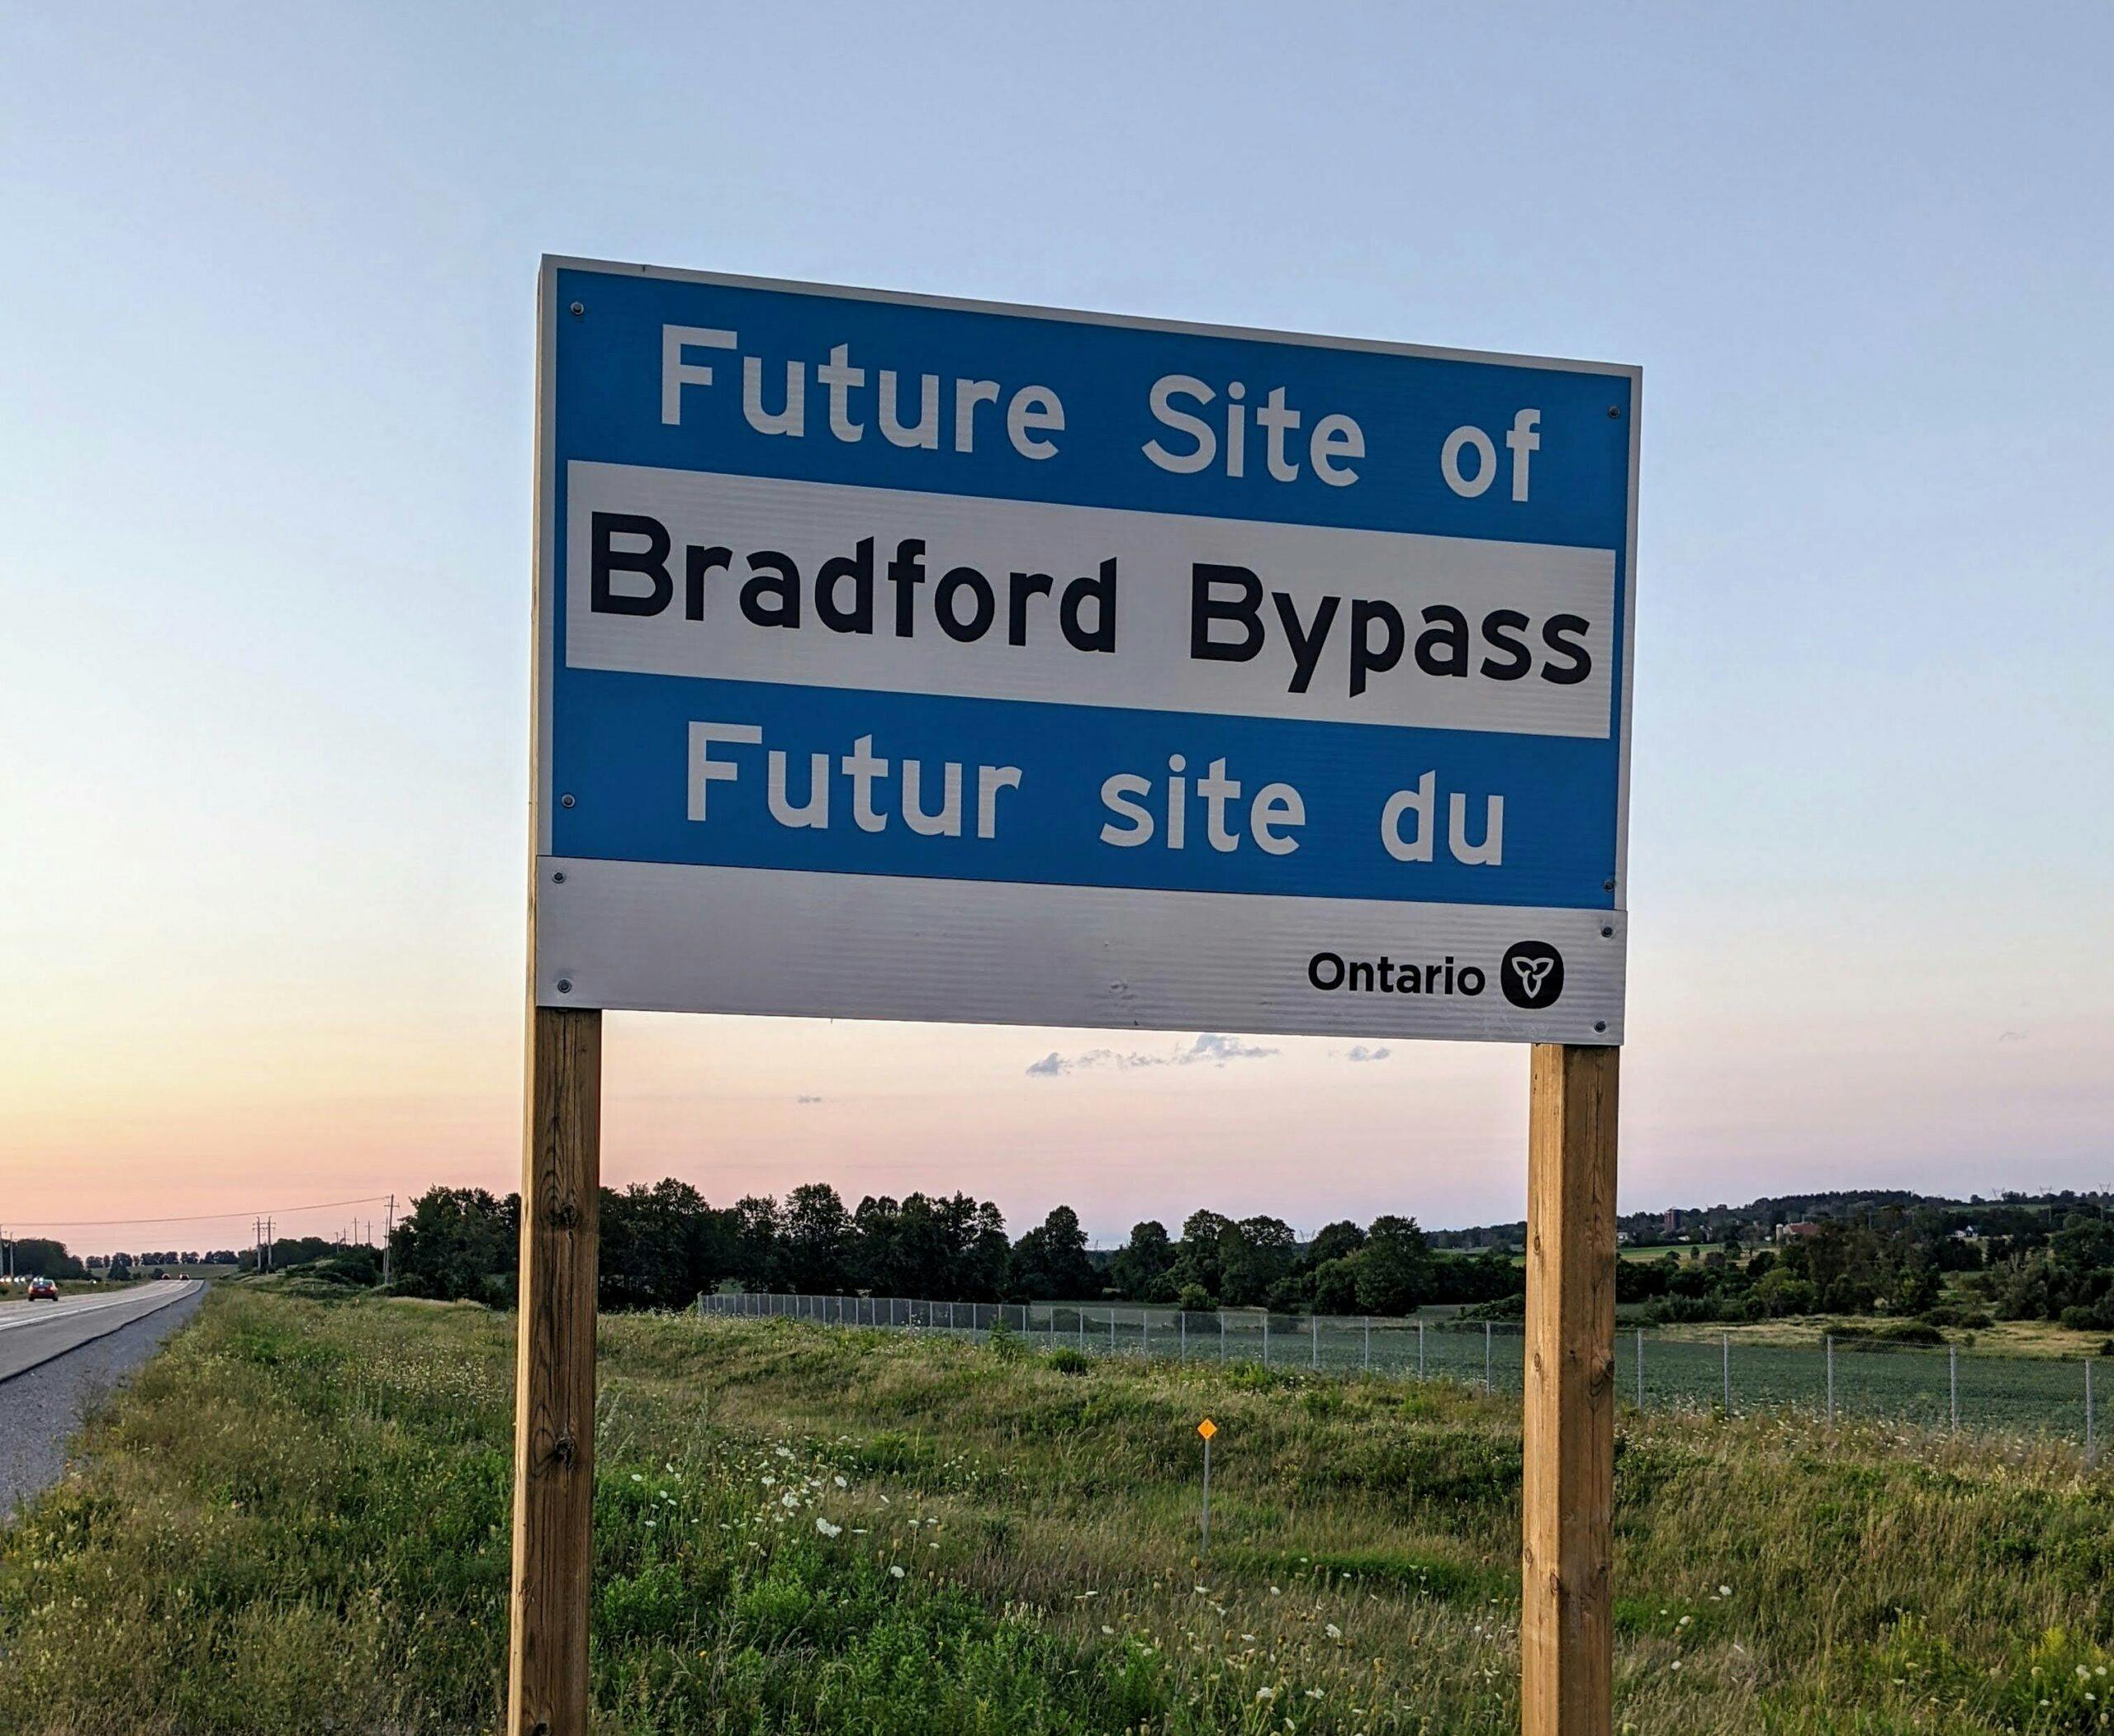 The uncertain road ahead for the Bradford Bypass